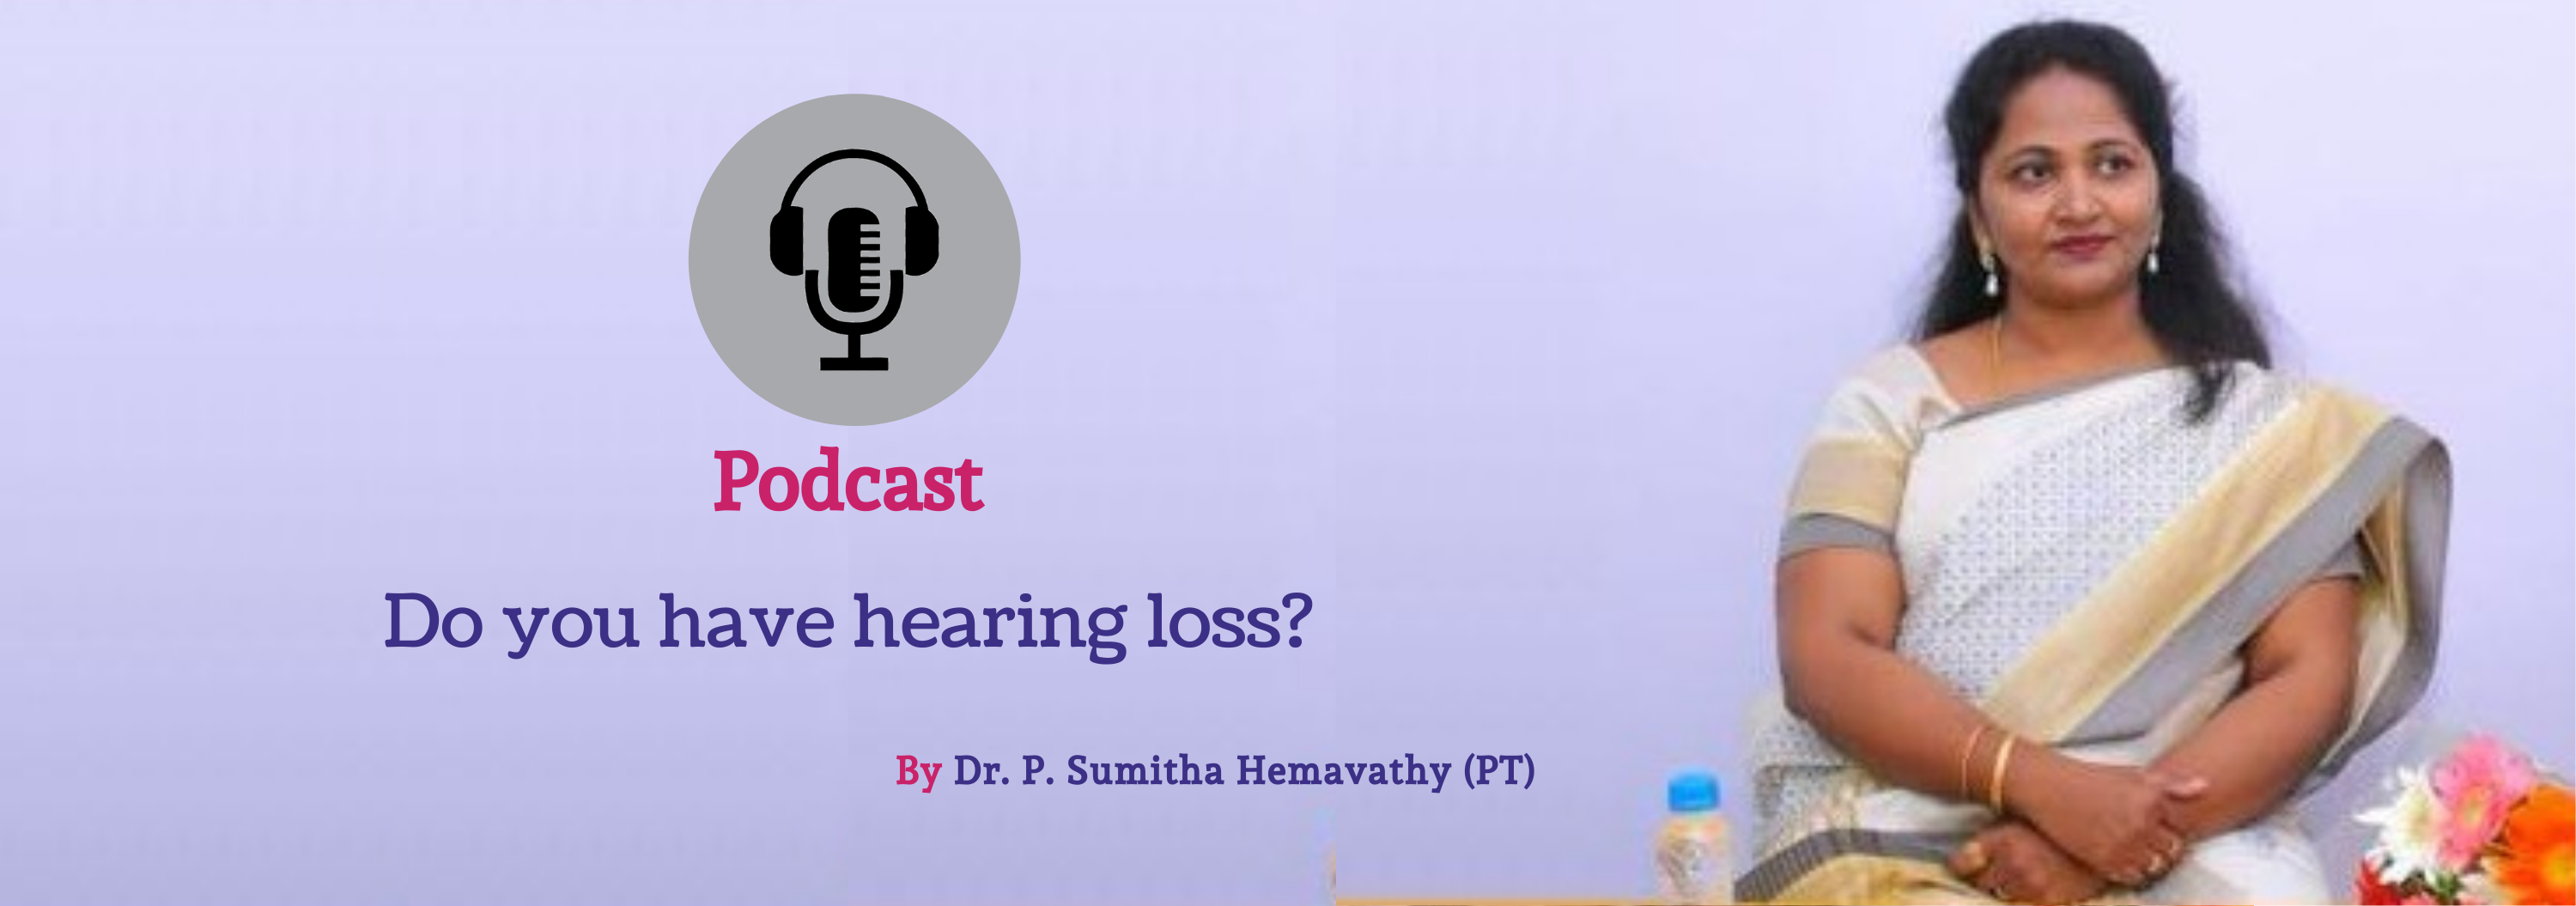 Hearing Loss Podcast by Dr. P. Sumitha Hemavathy (PT) - Hearing Aid Clinics in Bangalore - CAPAAR